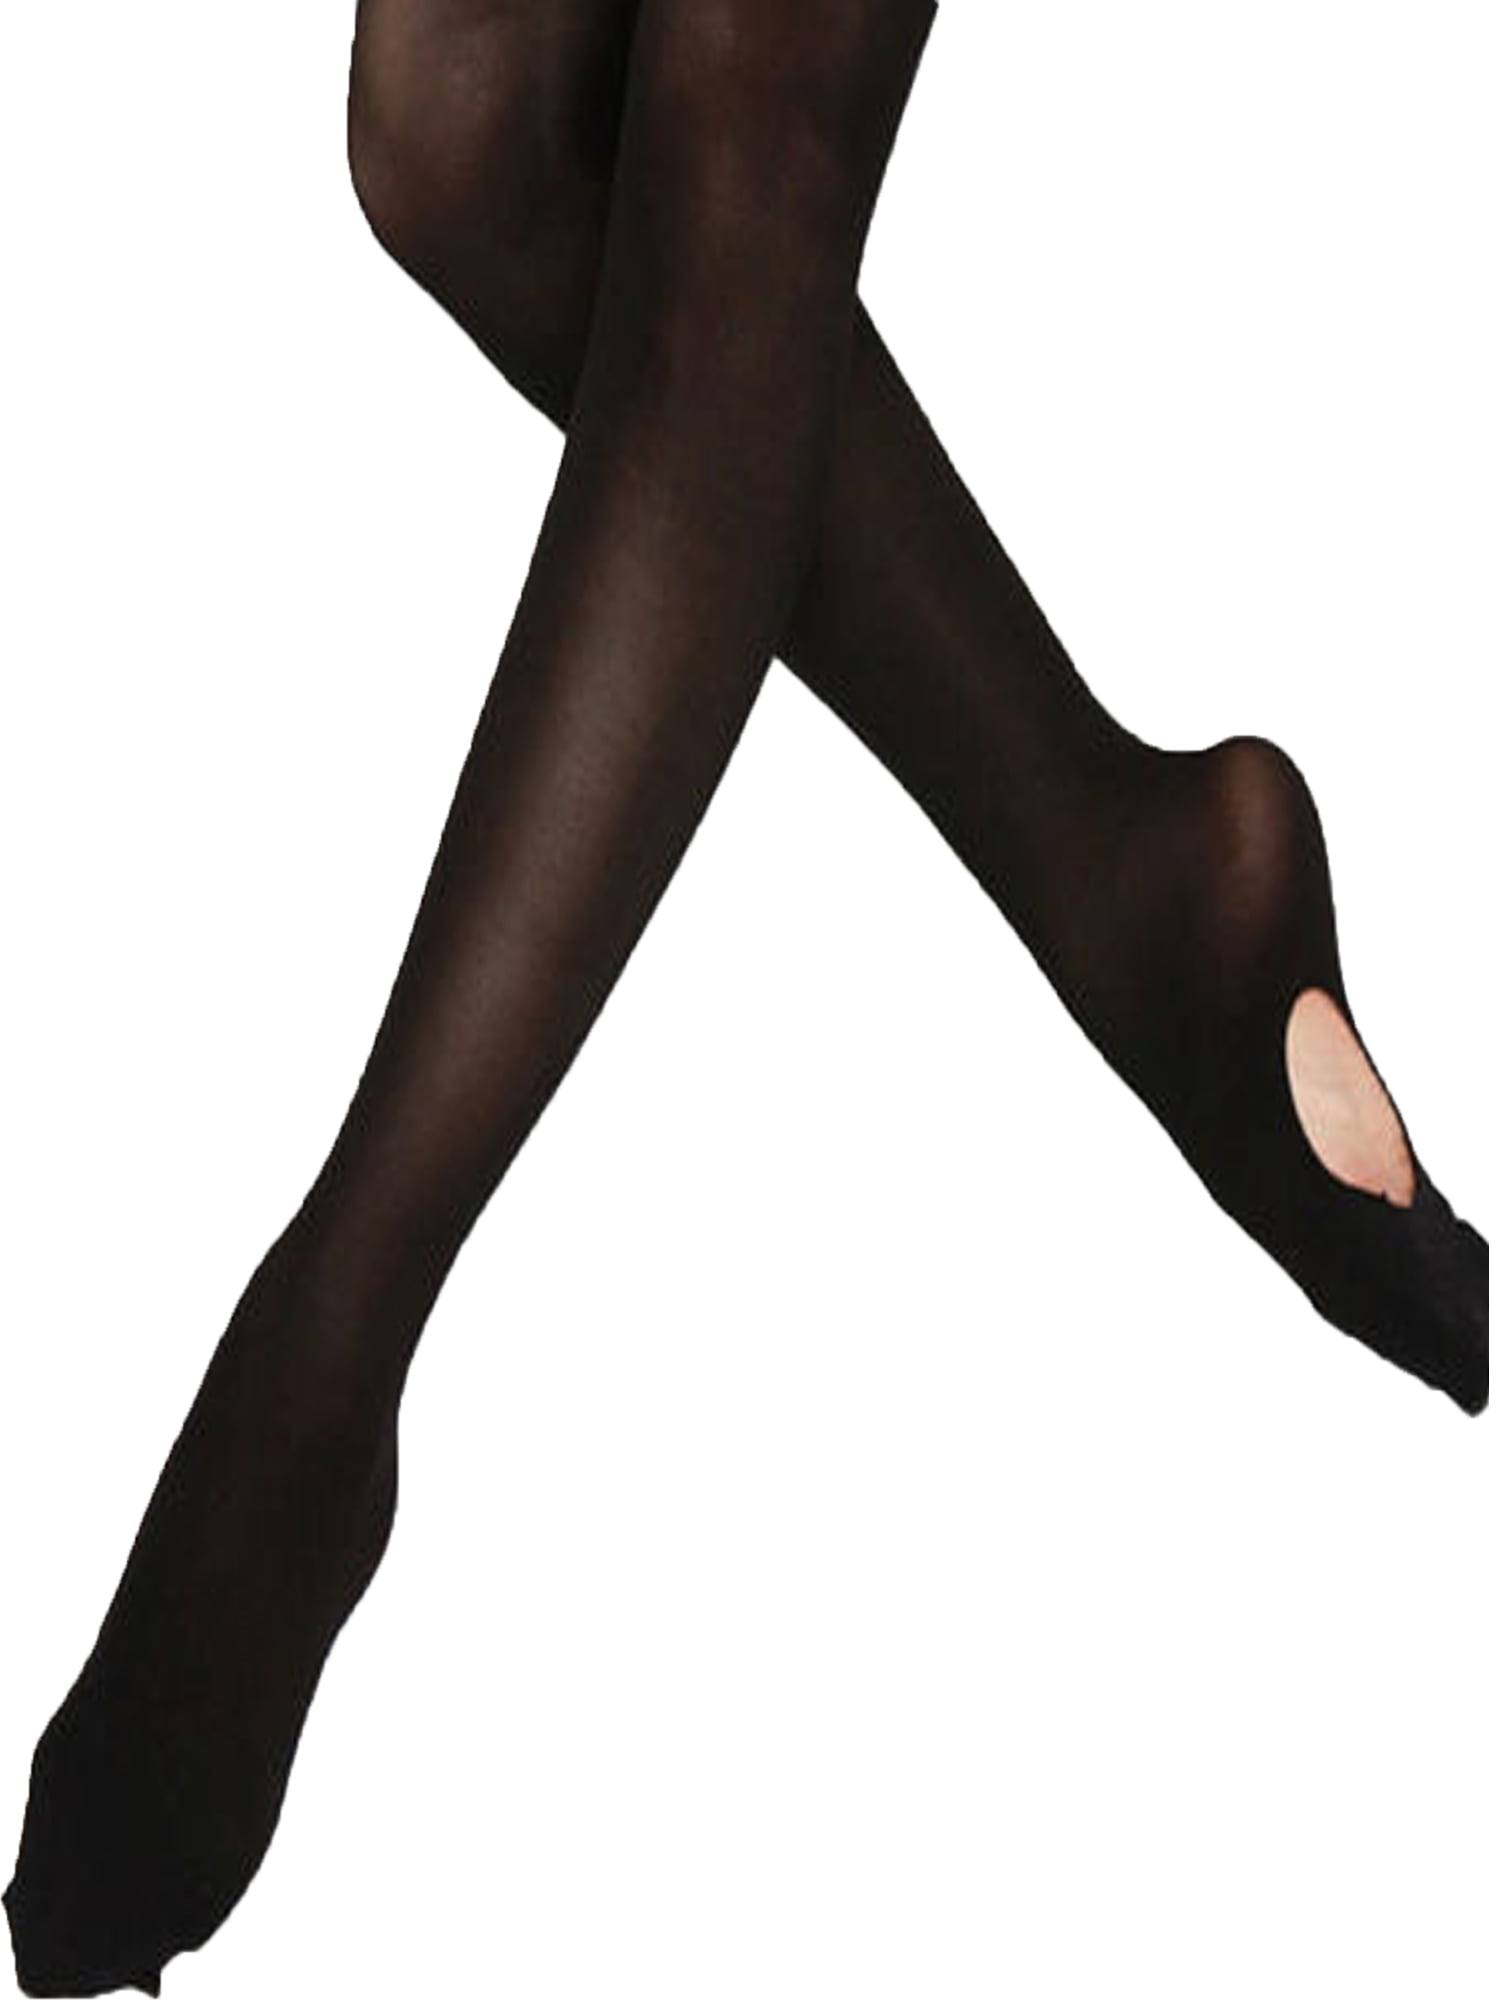 HOT Girls Baby Casual Tights Pantyhose Stocking Comfy Ballet Socks S/M/L 0-12Y 